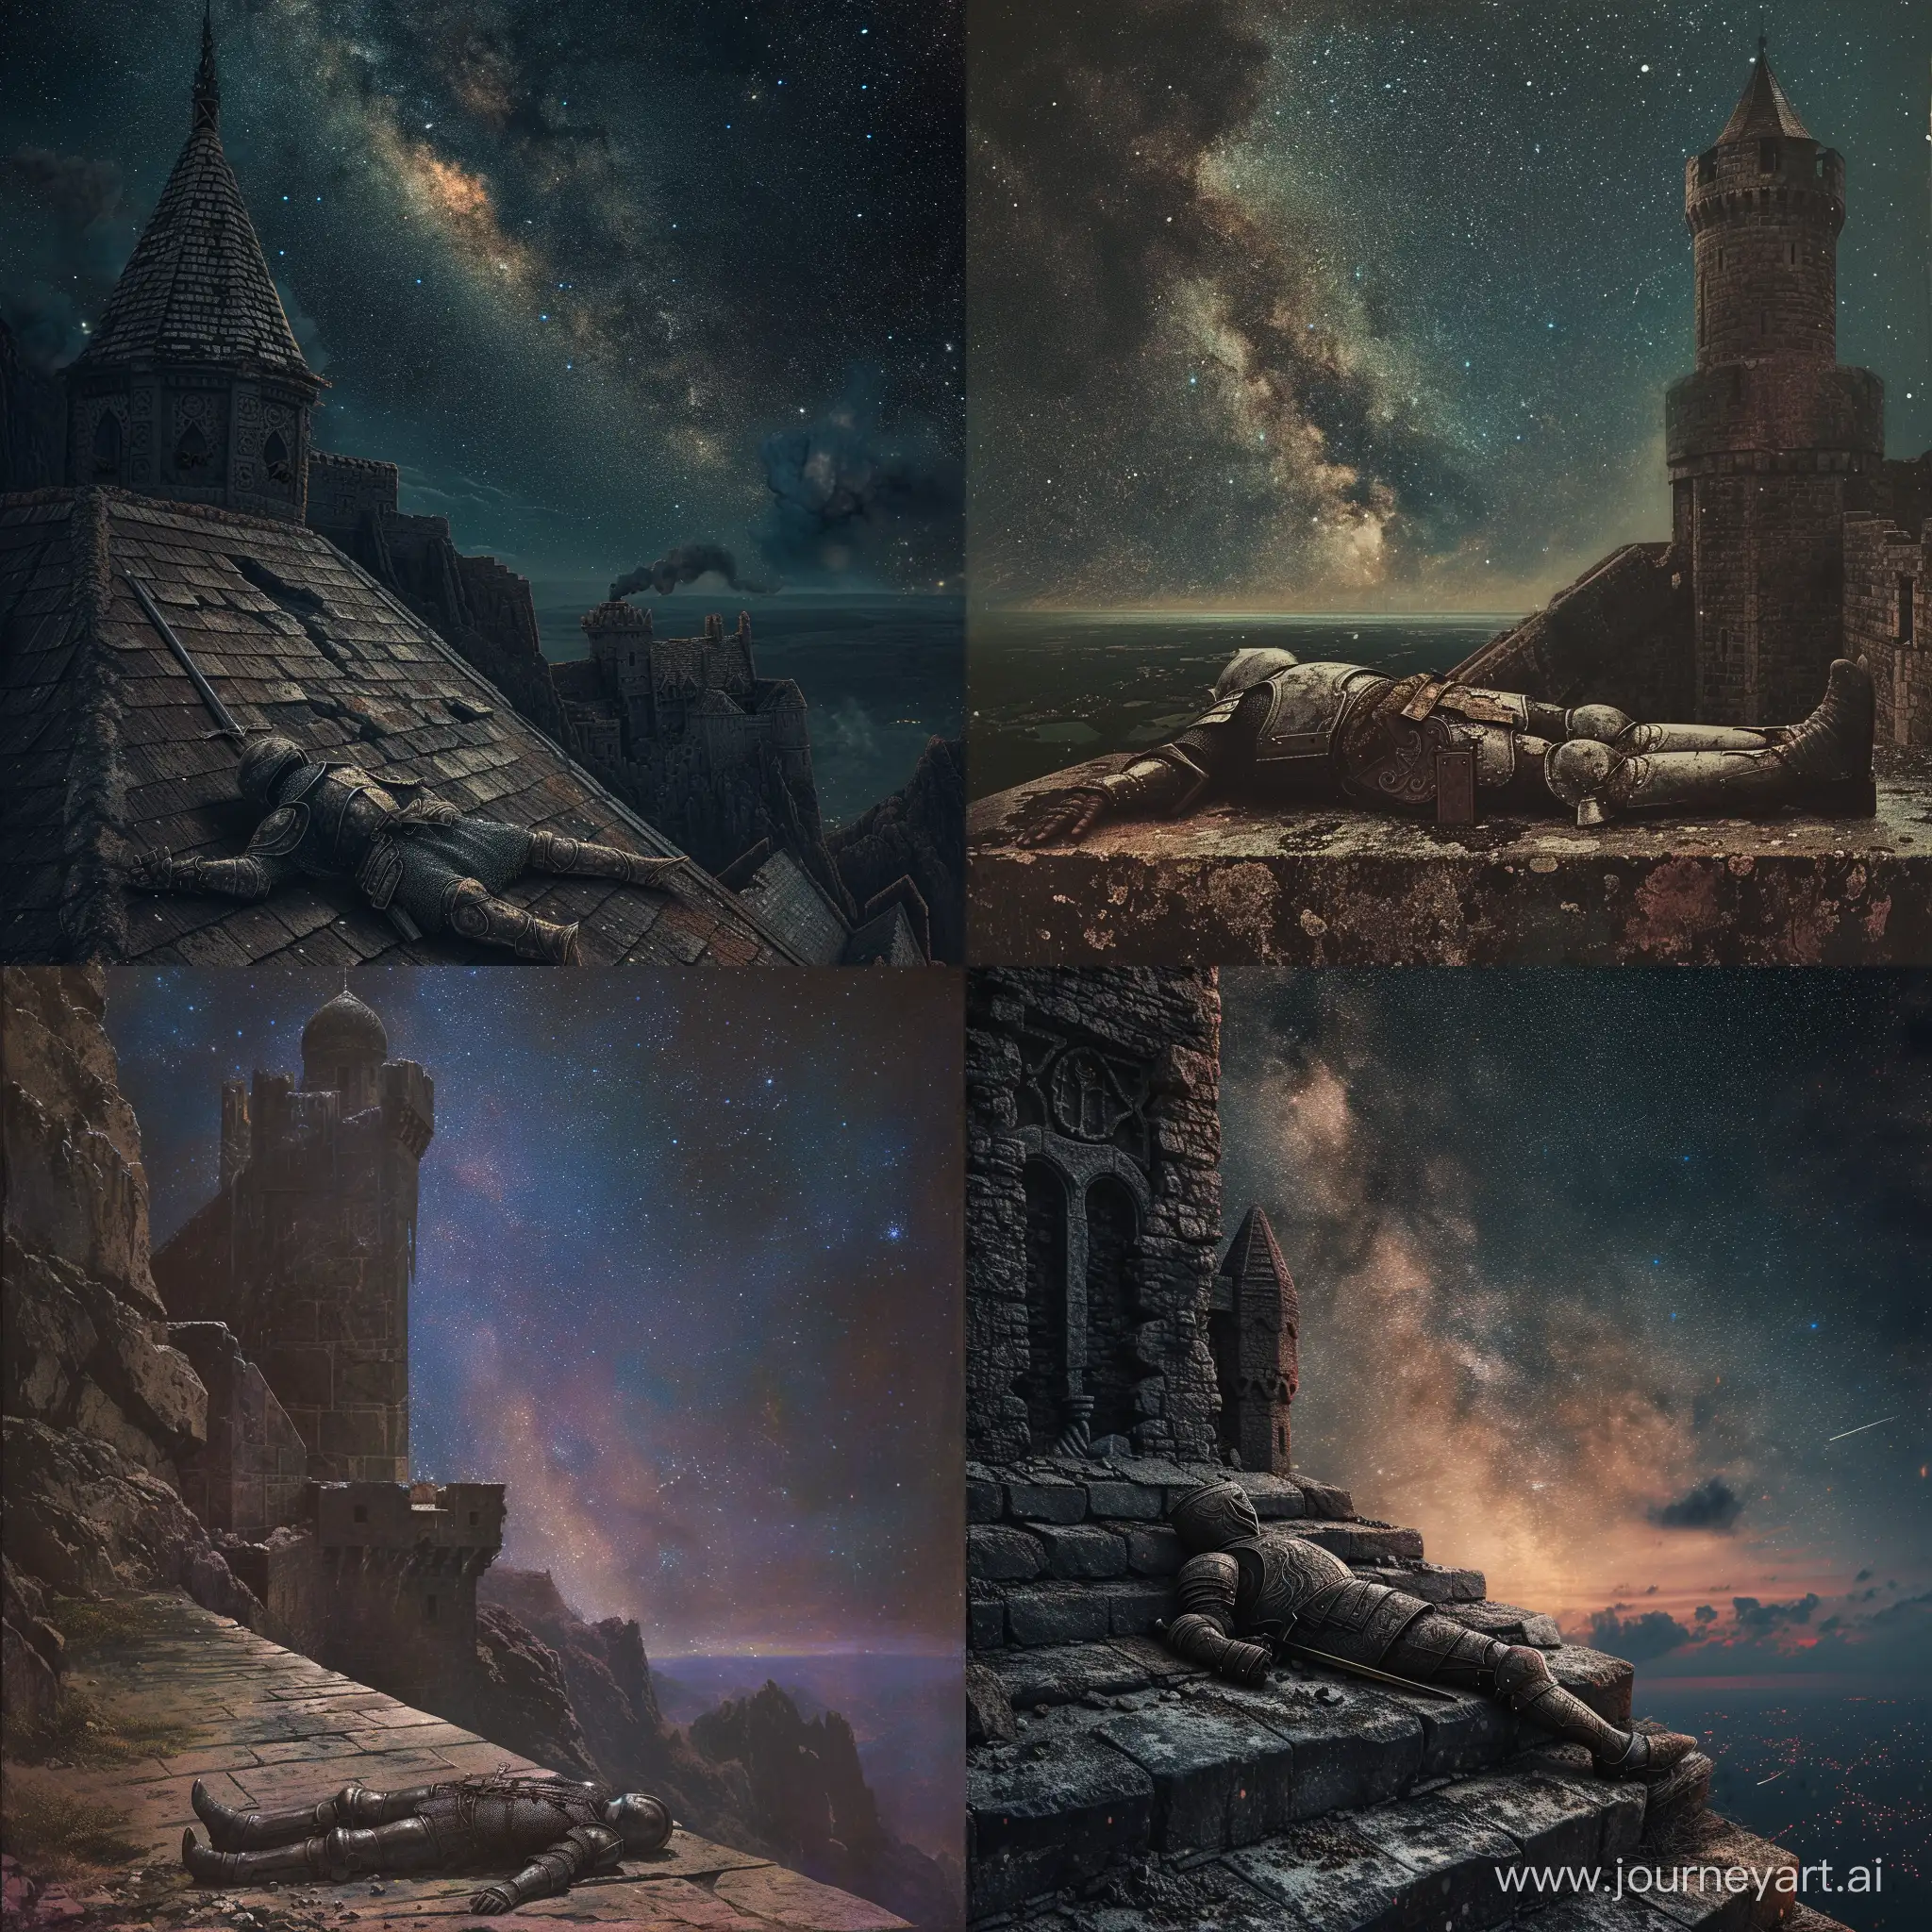  a knight lying taking its last breath in a Rooftop of a Citadel, solitary perch on the highest point of a fortress, view of the milky way in the sky, peaceful,1970's dark fantasy style, gritty, dark, vintage, detailed